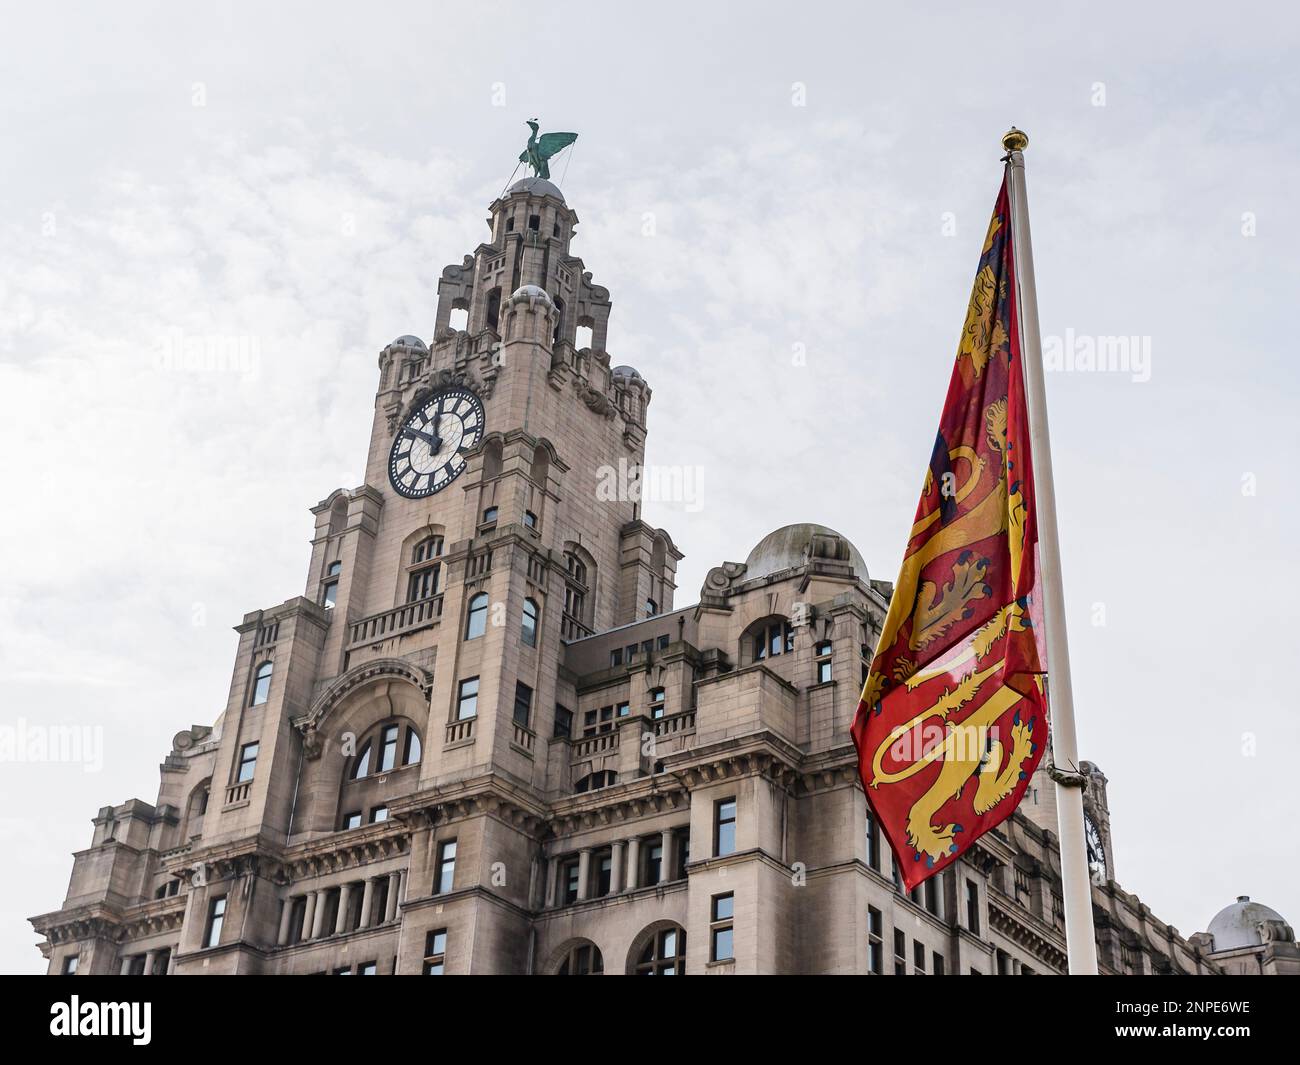 Royal arms of England in front of the Royal Liver Building on the Liverpool waterfront two days after Queen Elizabeth II passed away. Stock Photo